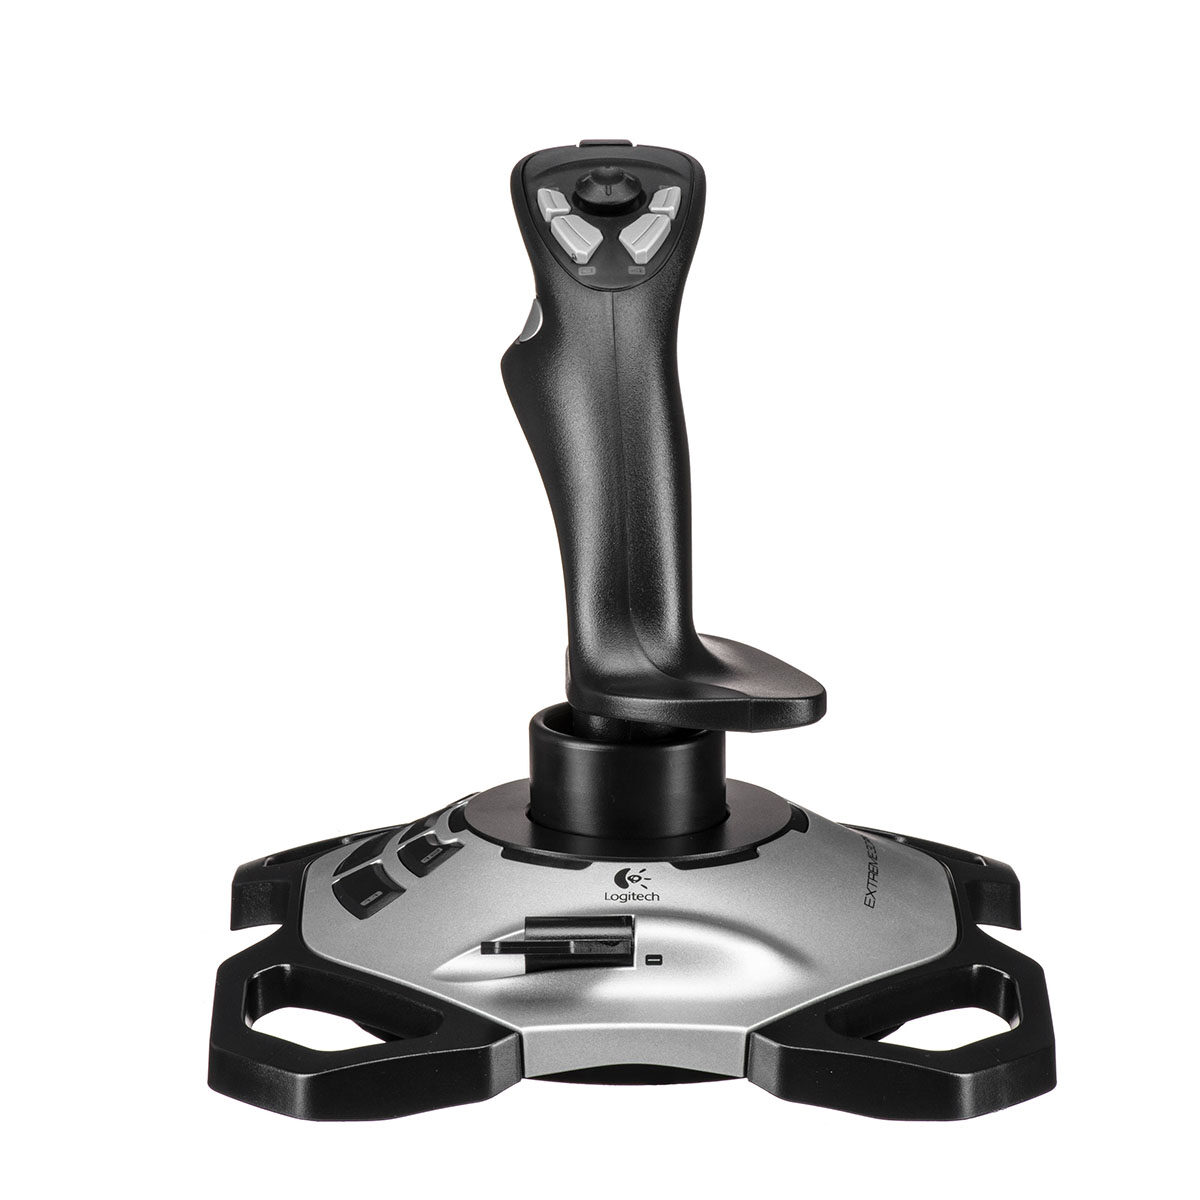 Logitech Extreme 3D Pro Joystick (942-000008) with Twist Rudder Control, 12 Buttons Programmable, 8-Way Hat Switch, Rapid Fire Trigger, Stable and Weighted Base